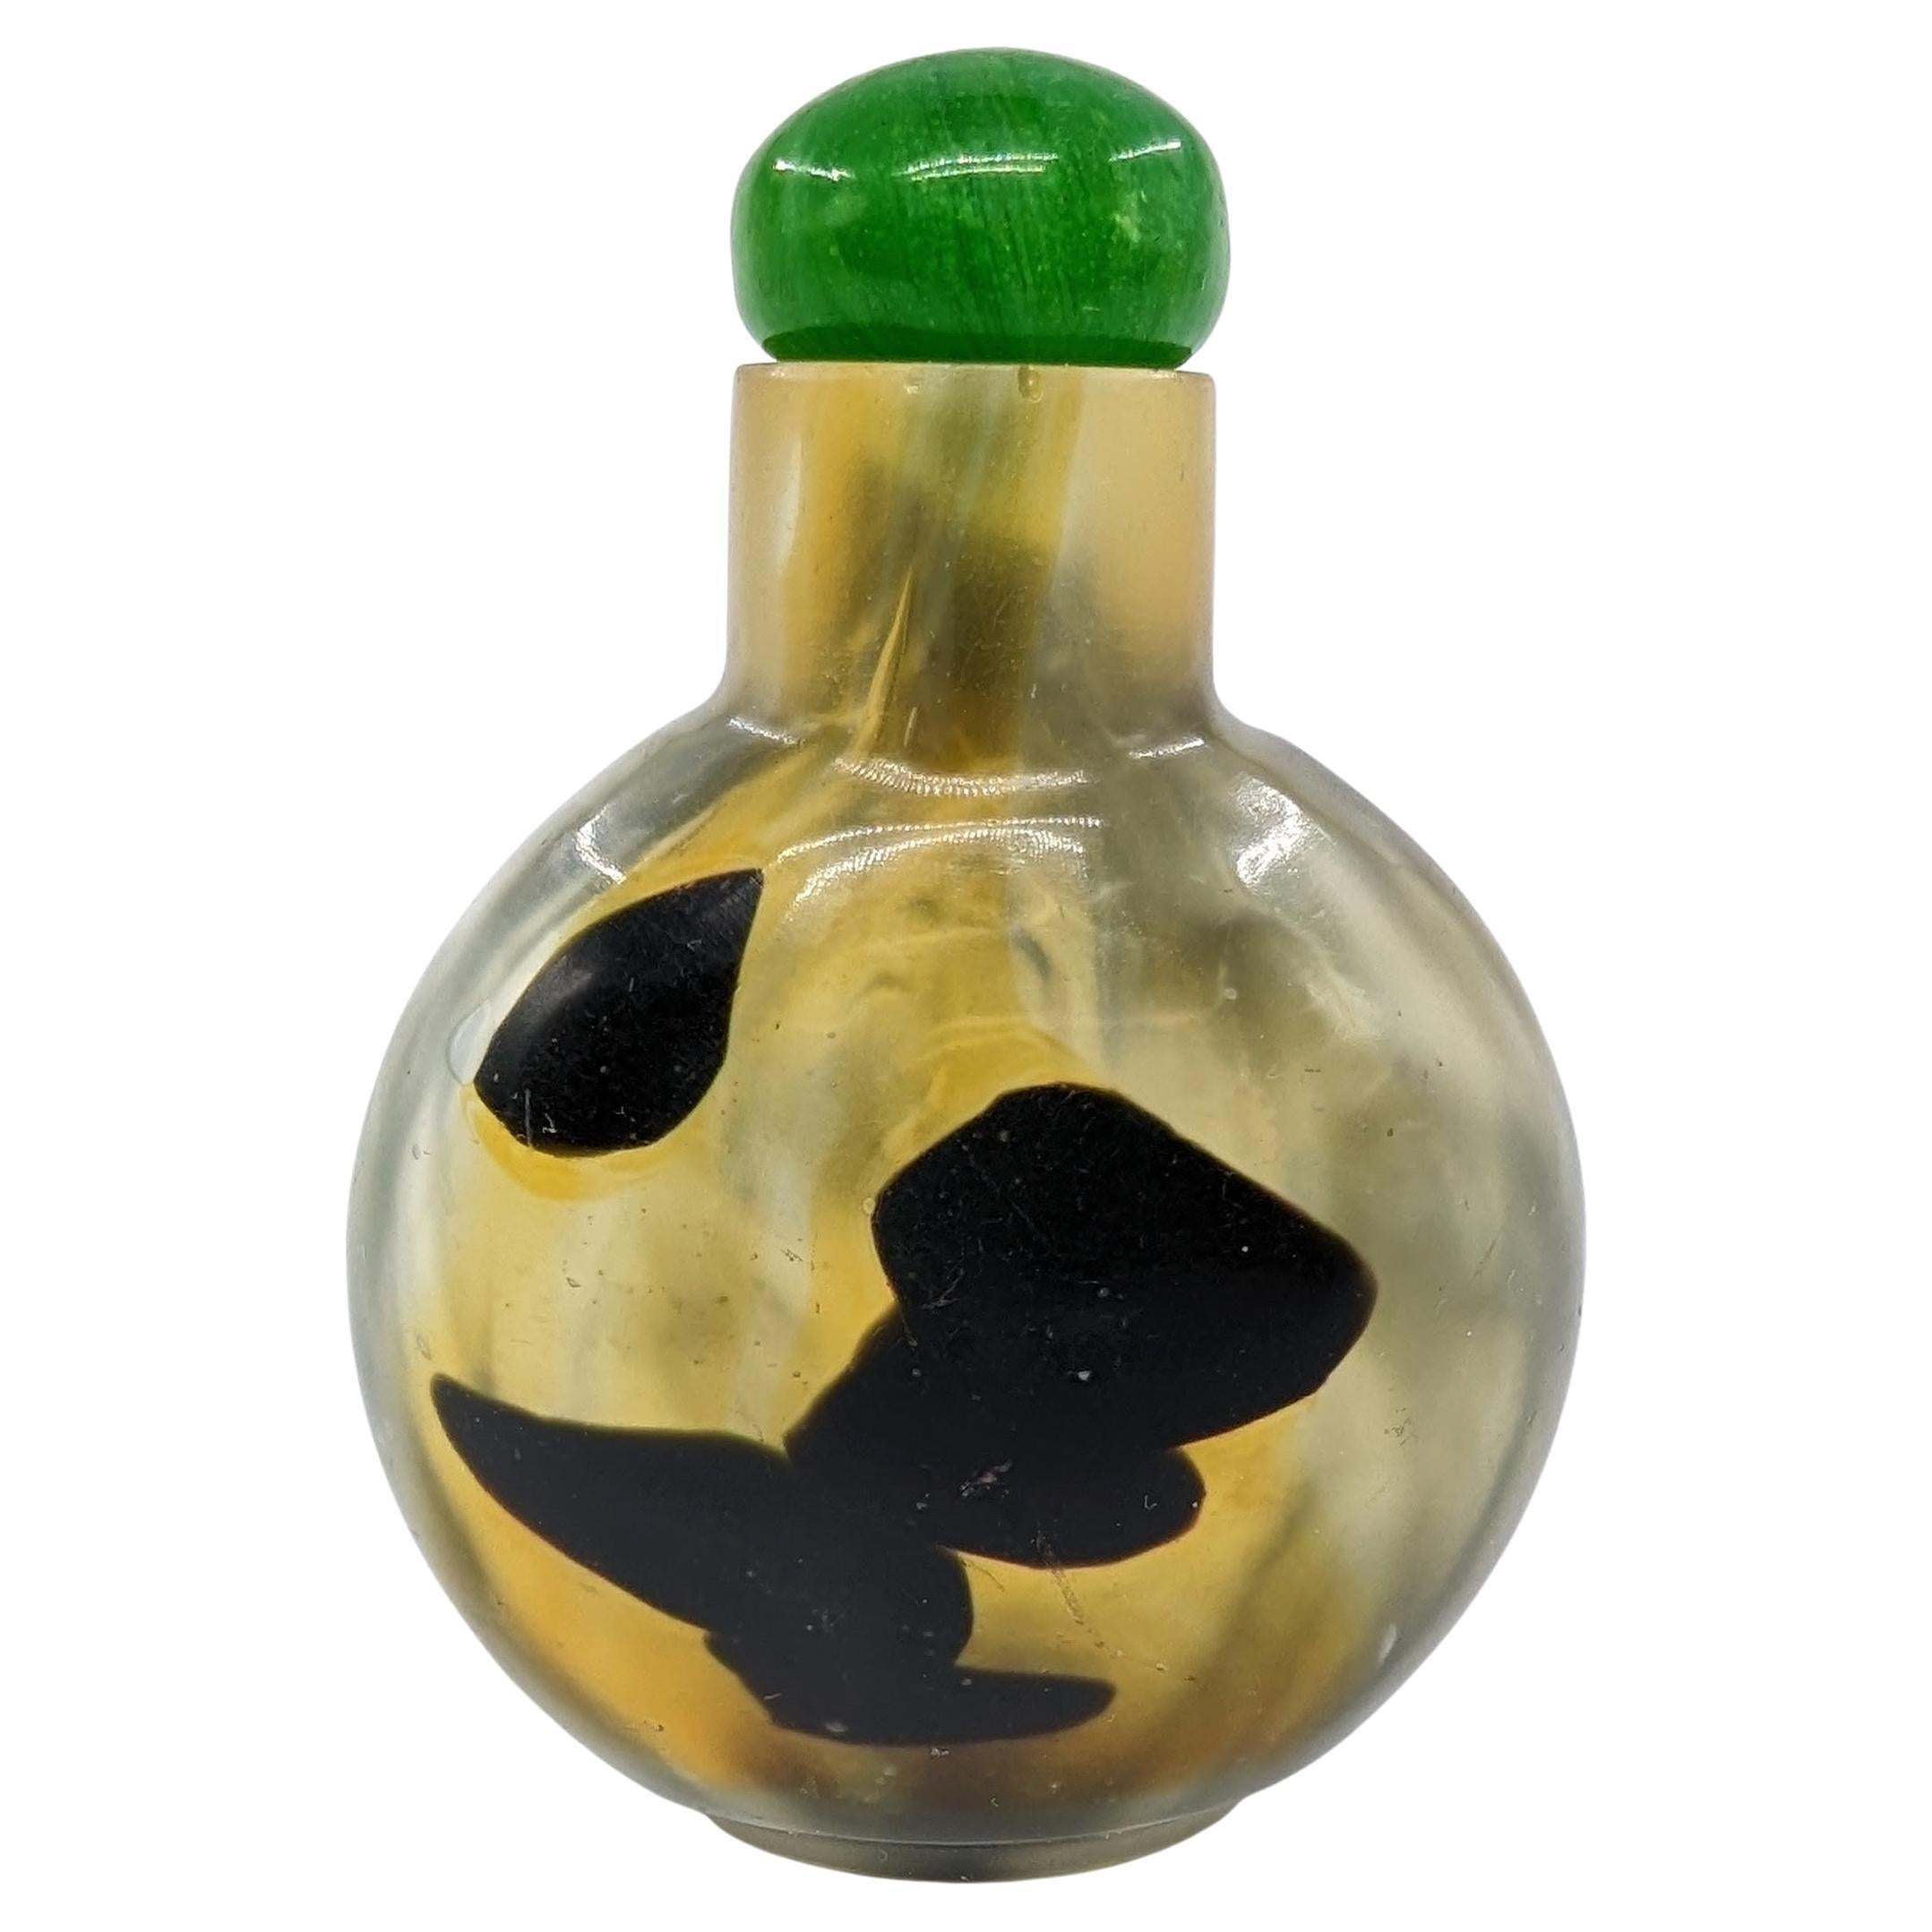 Antique Chinese 3 color Peking glass imitating shadow agate snuff bottle in flattened globular form, raised on a carved flat footring, with a green swirl glass stopper

19c Qing Dynasty